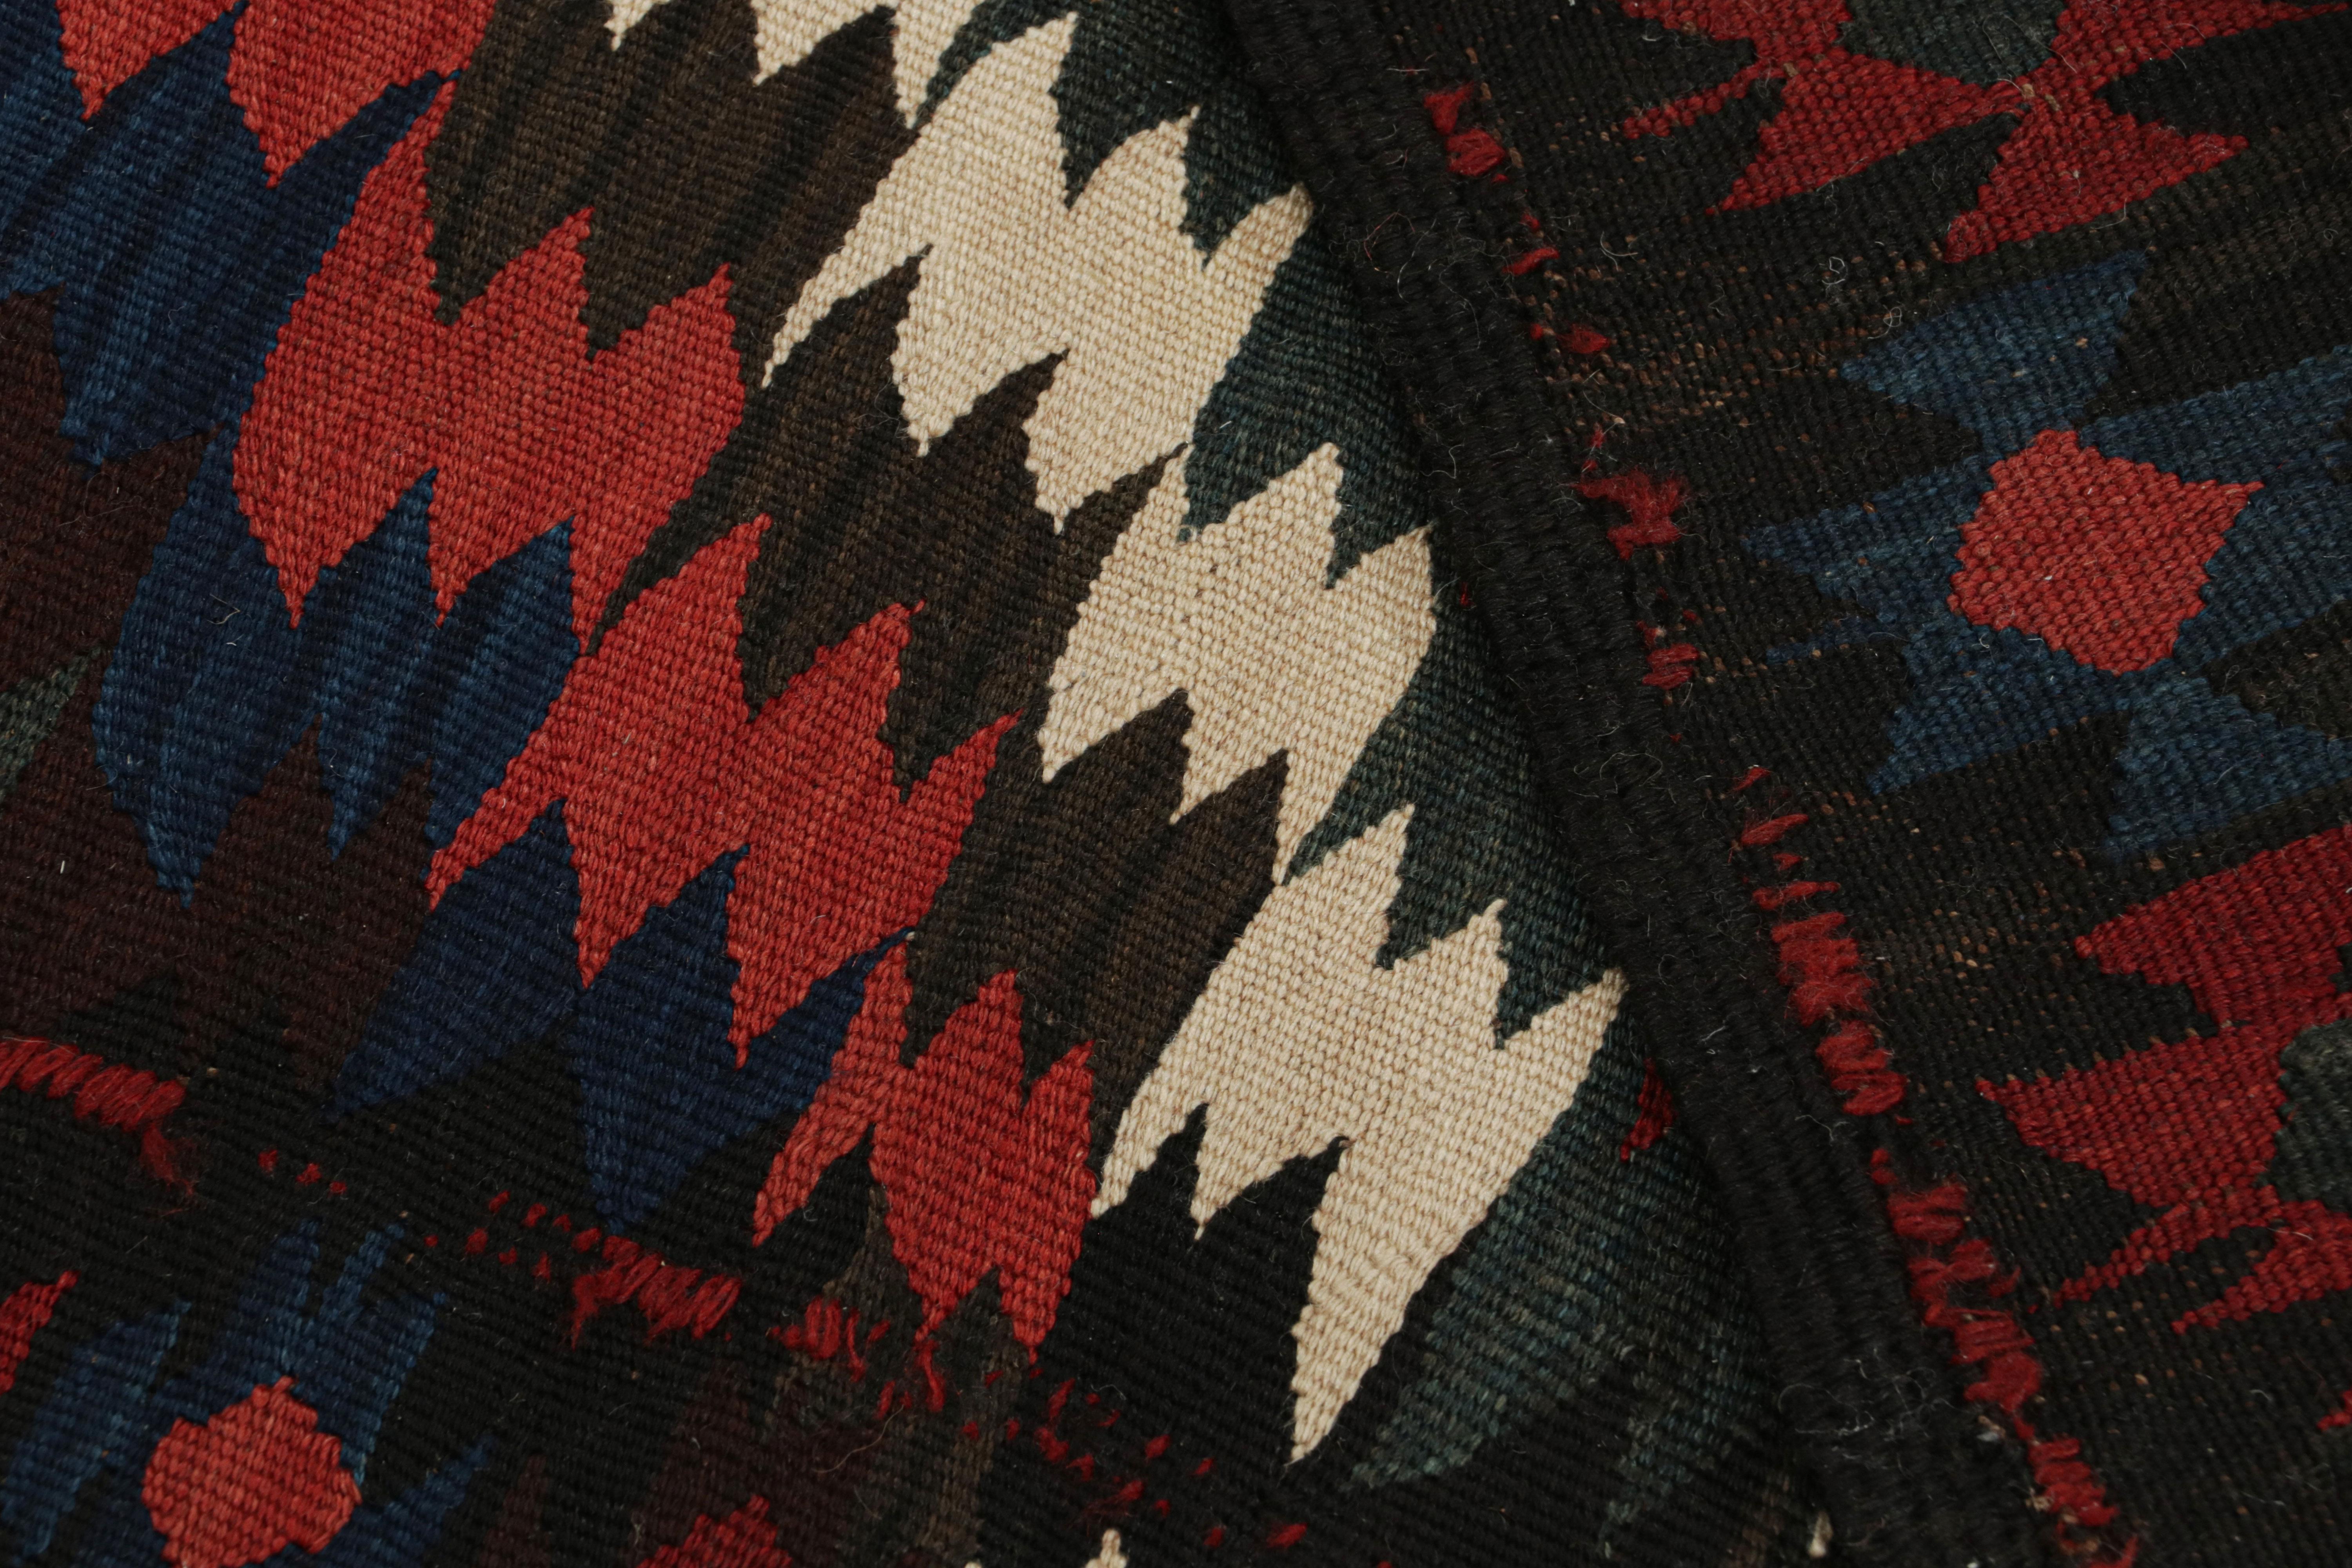 Vintage Kilim with Red, Teal and Blue Geometric Patterns, from Rug & Kilim  In Good Condition For Sale In Long Island City, NY